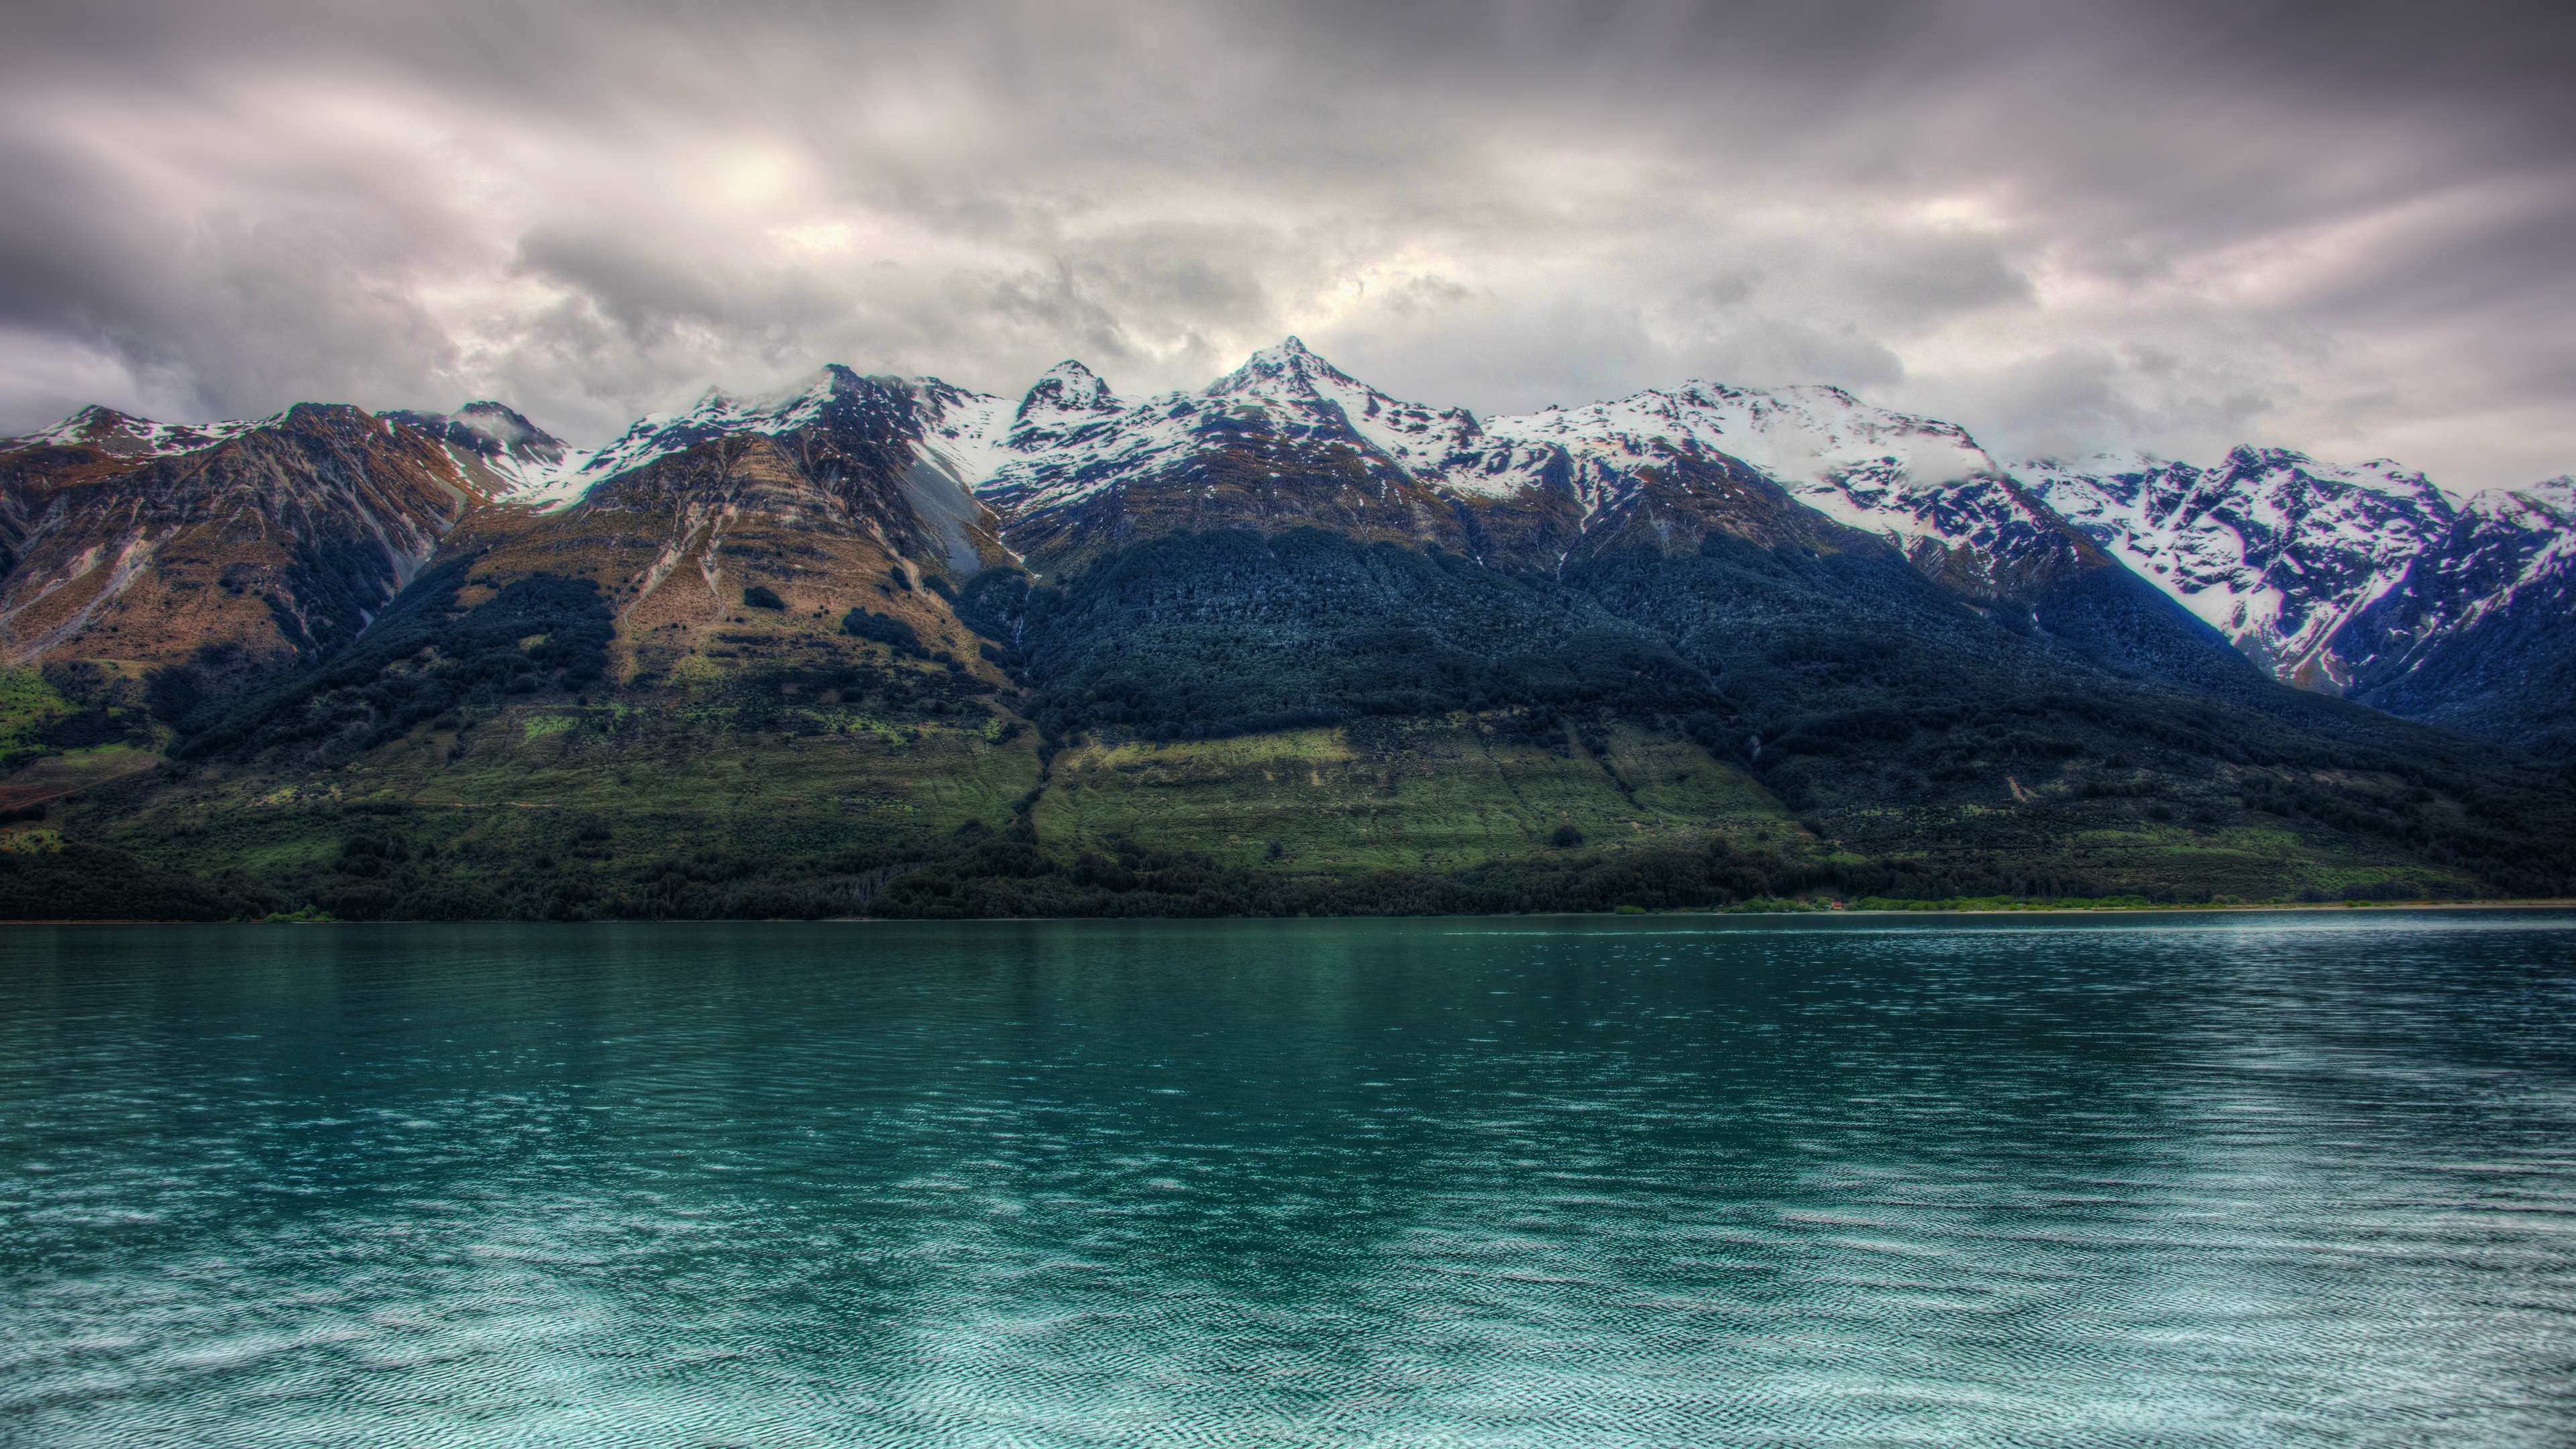 General 3840x2160 Trey Ratcliff photography landscape New Zealand nature water mountains snow clouds mountain chain